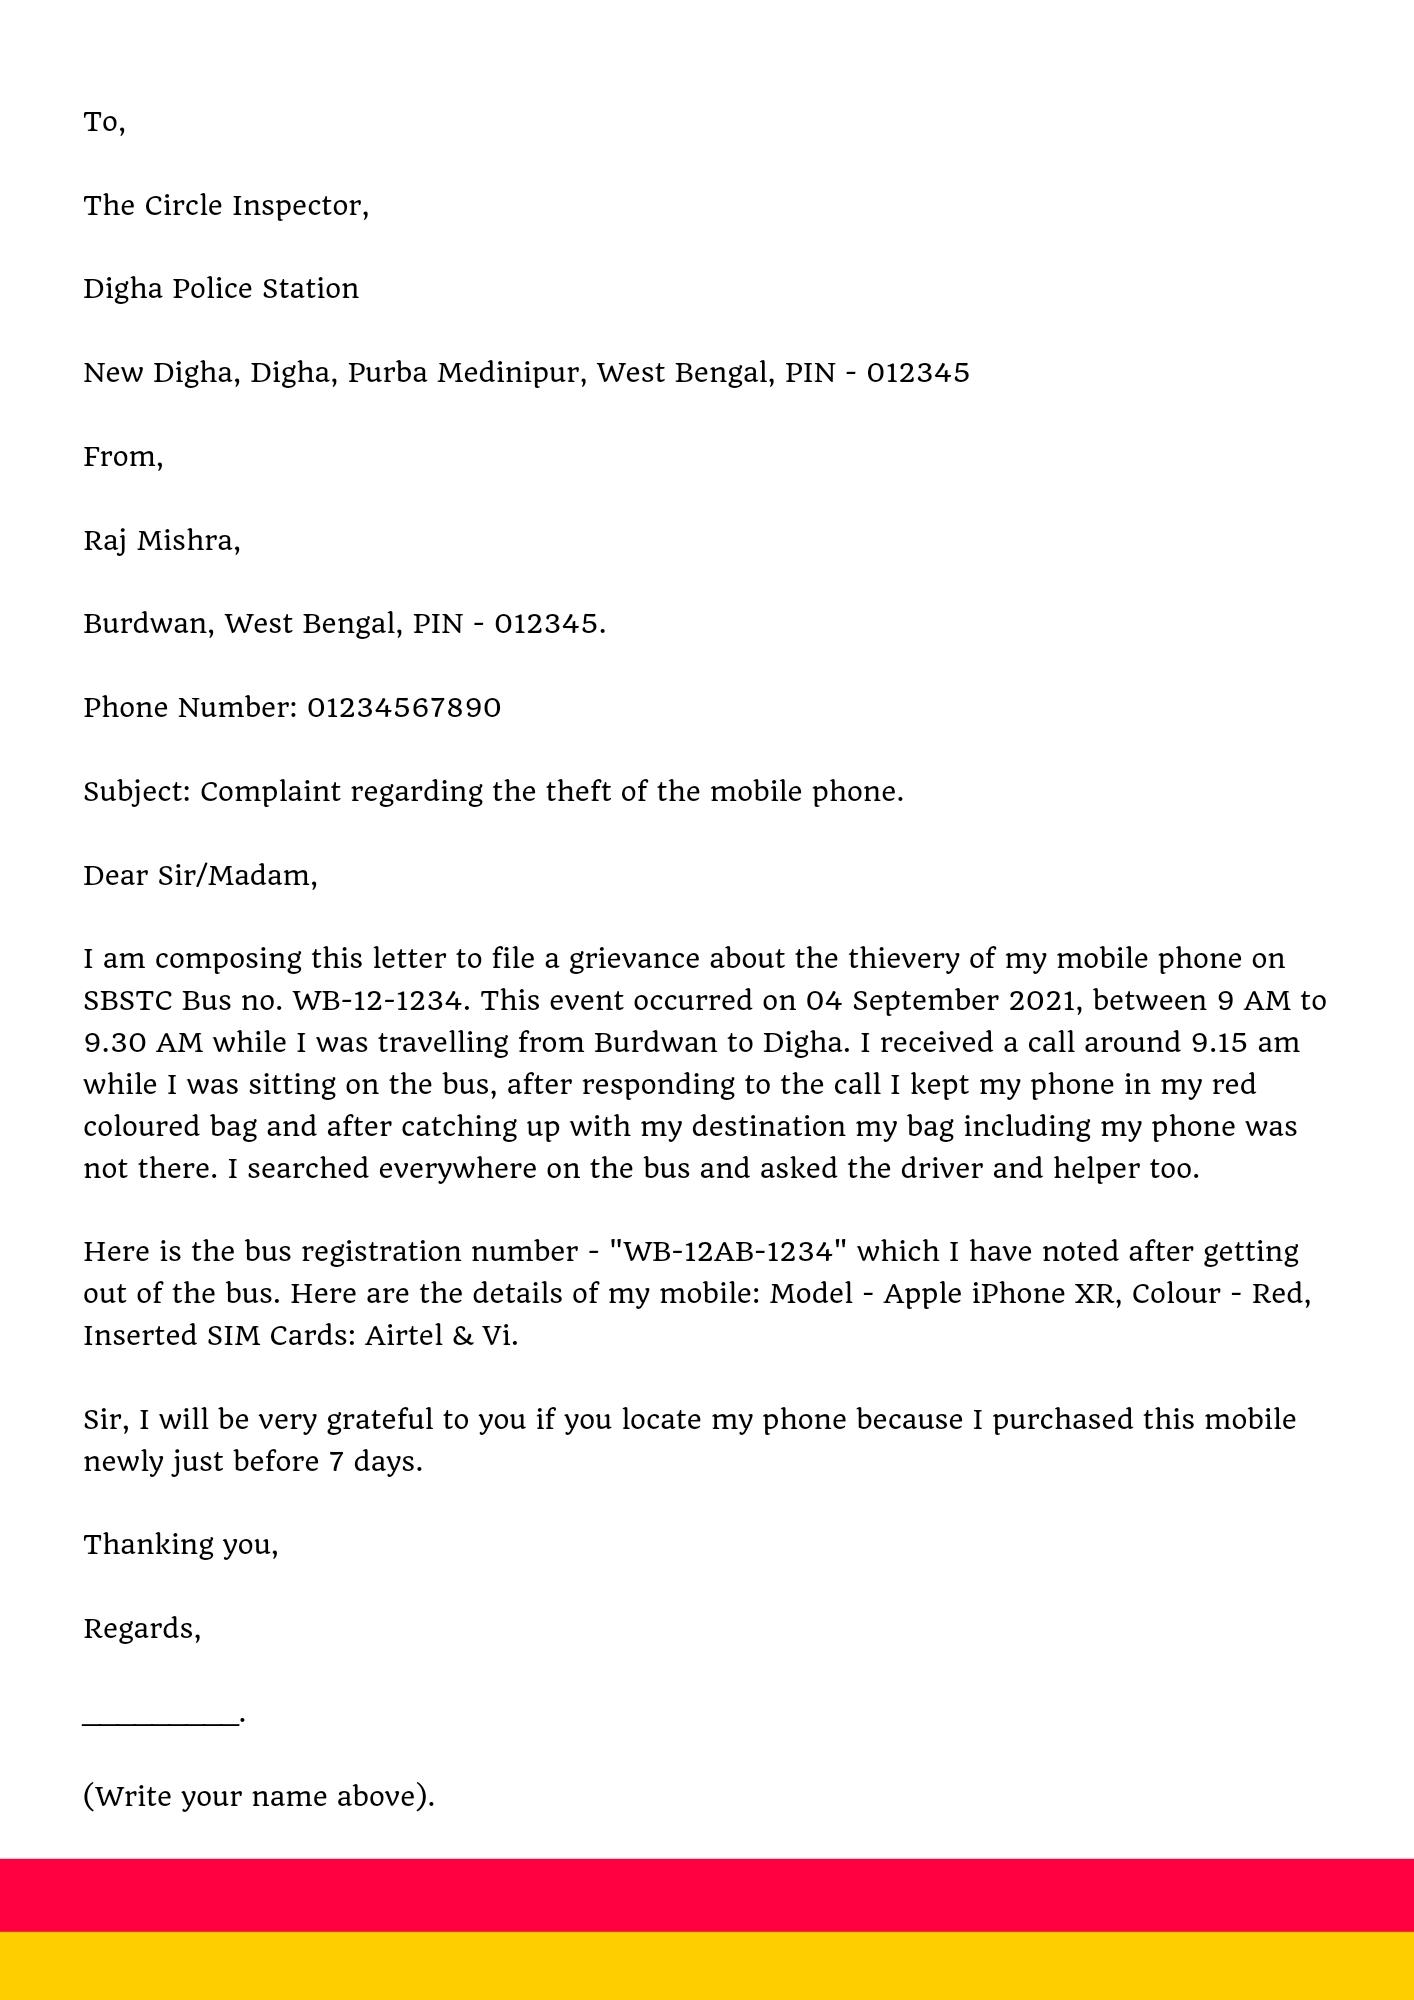 Complaint Letter to Police Station About Theft of Mobile Phone, Theft ...